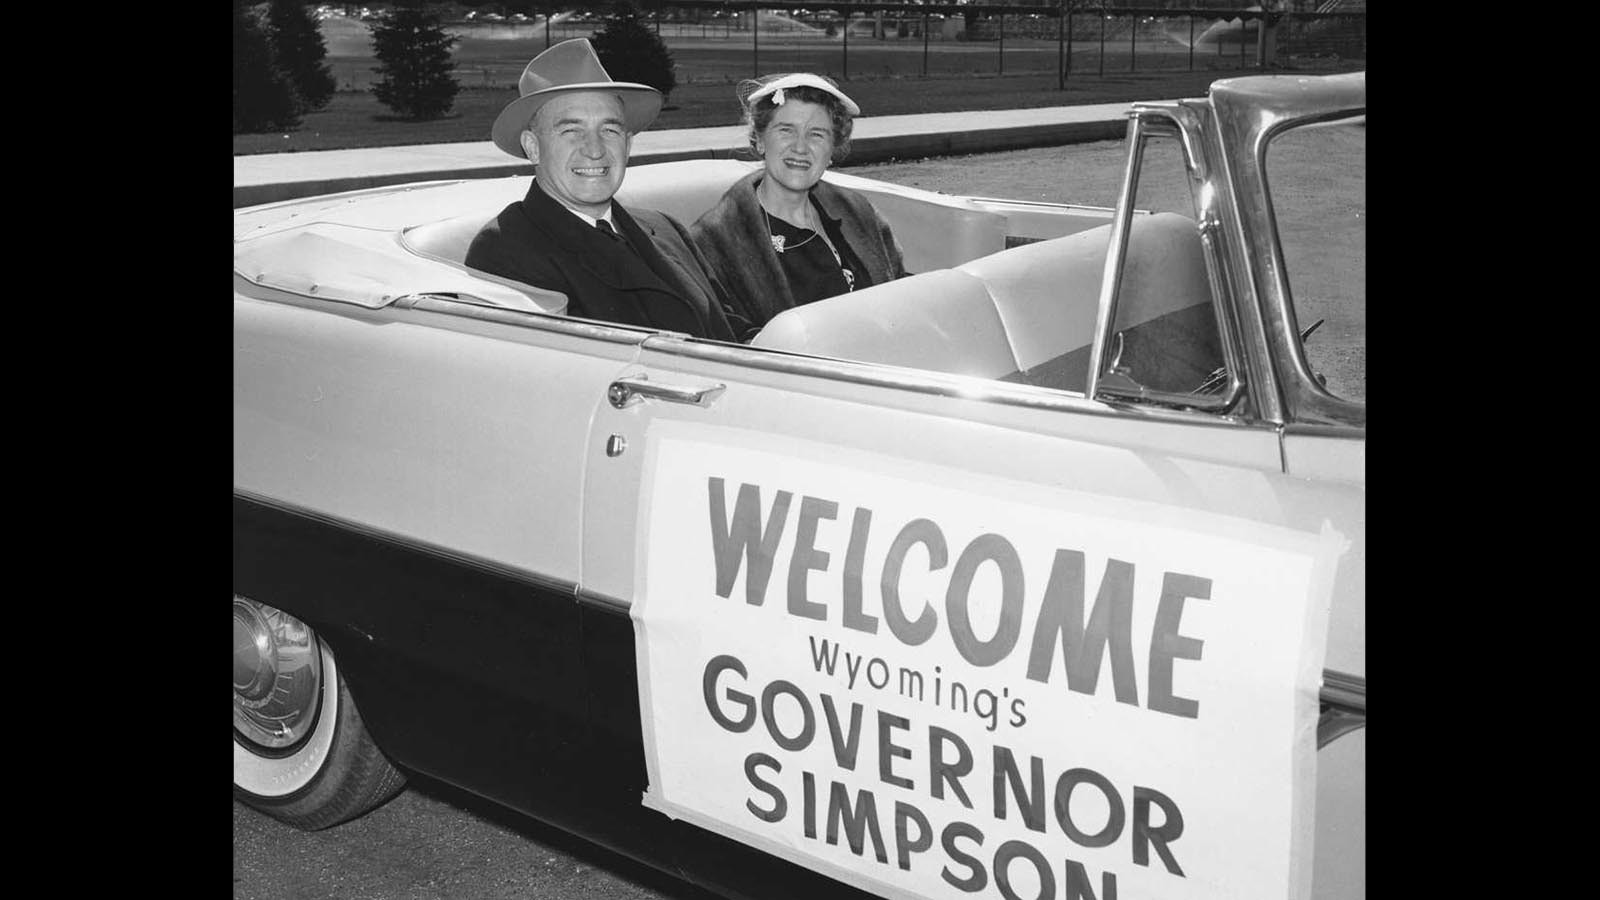 Gov. Milward Simpson, shown here with his wife Lorna, commuted two death sentences for Tricky Riggle. He lost his bid for reelection, which many have said was because of his saving Riggle from the gas chamber.